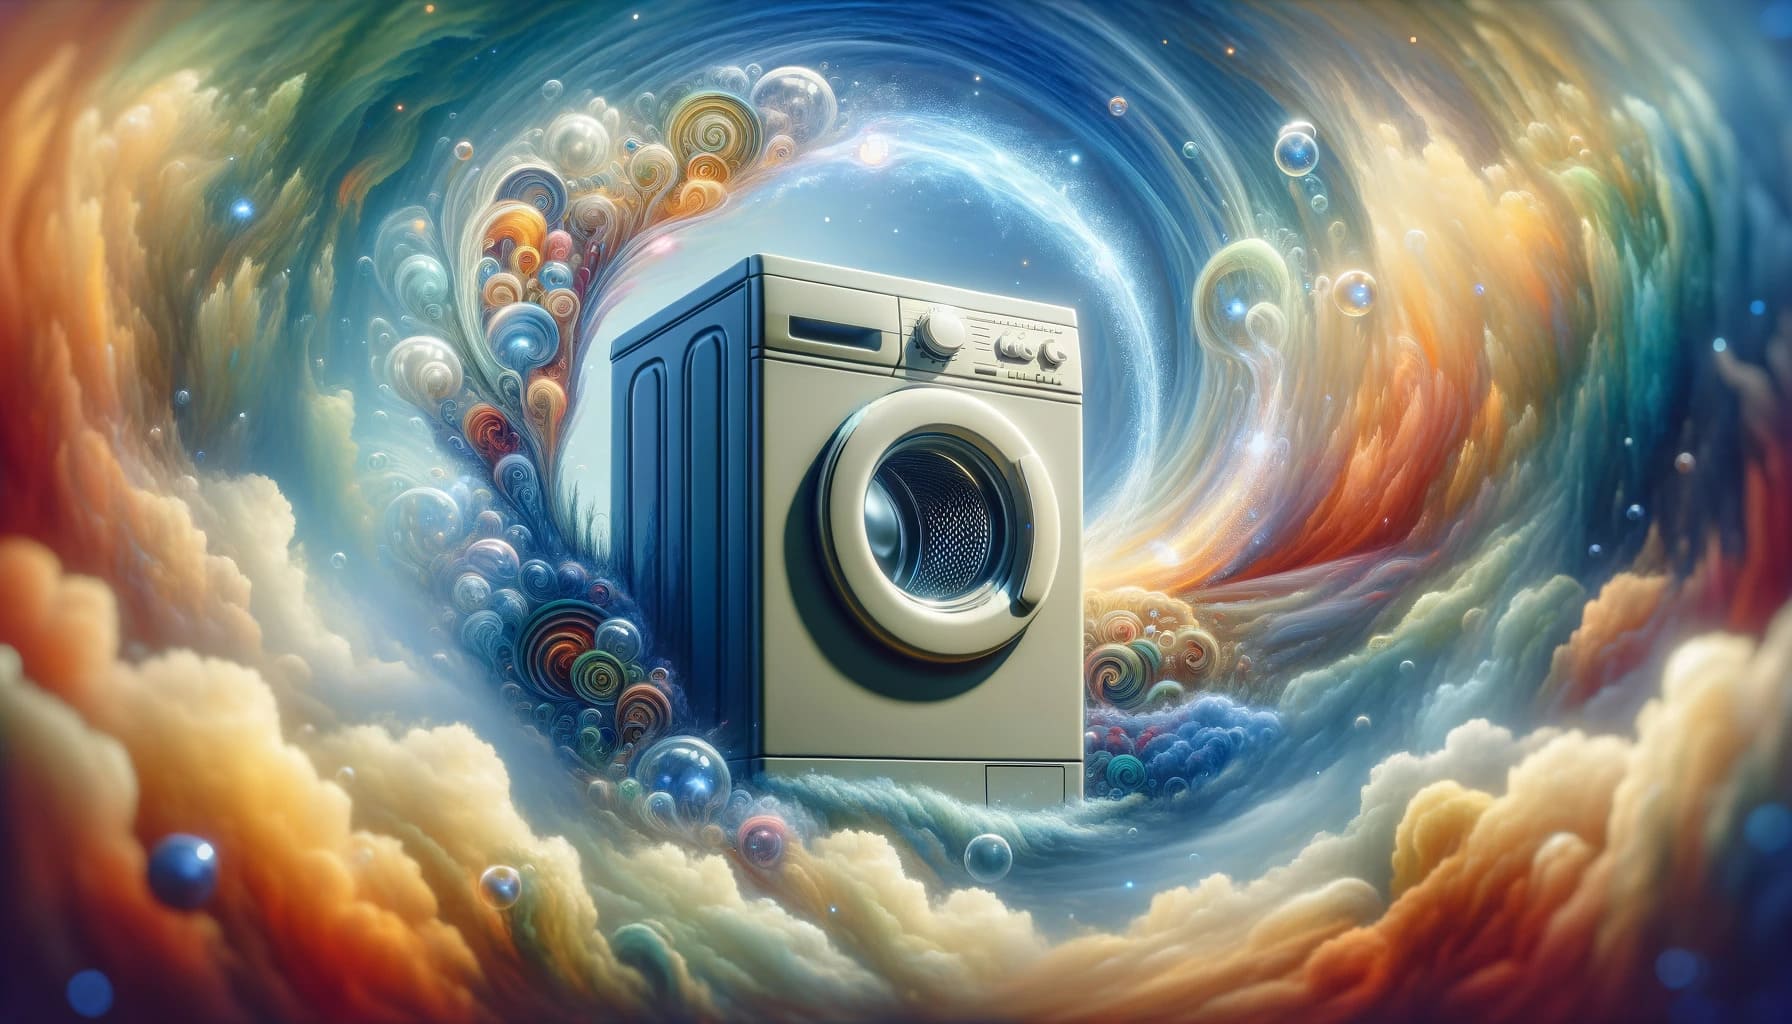 DALL%C2%B7E 2023 11 27 21.12.46 A surreal and symbolic image representing the concept of a washing machine in a dream. The image should depict a washing machine in an abstract dream